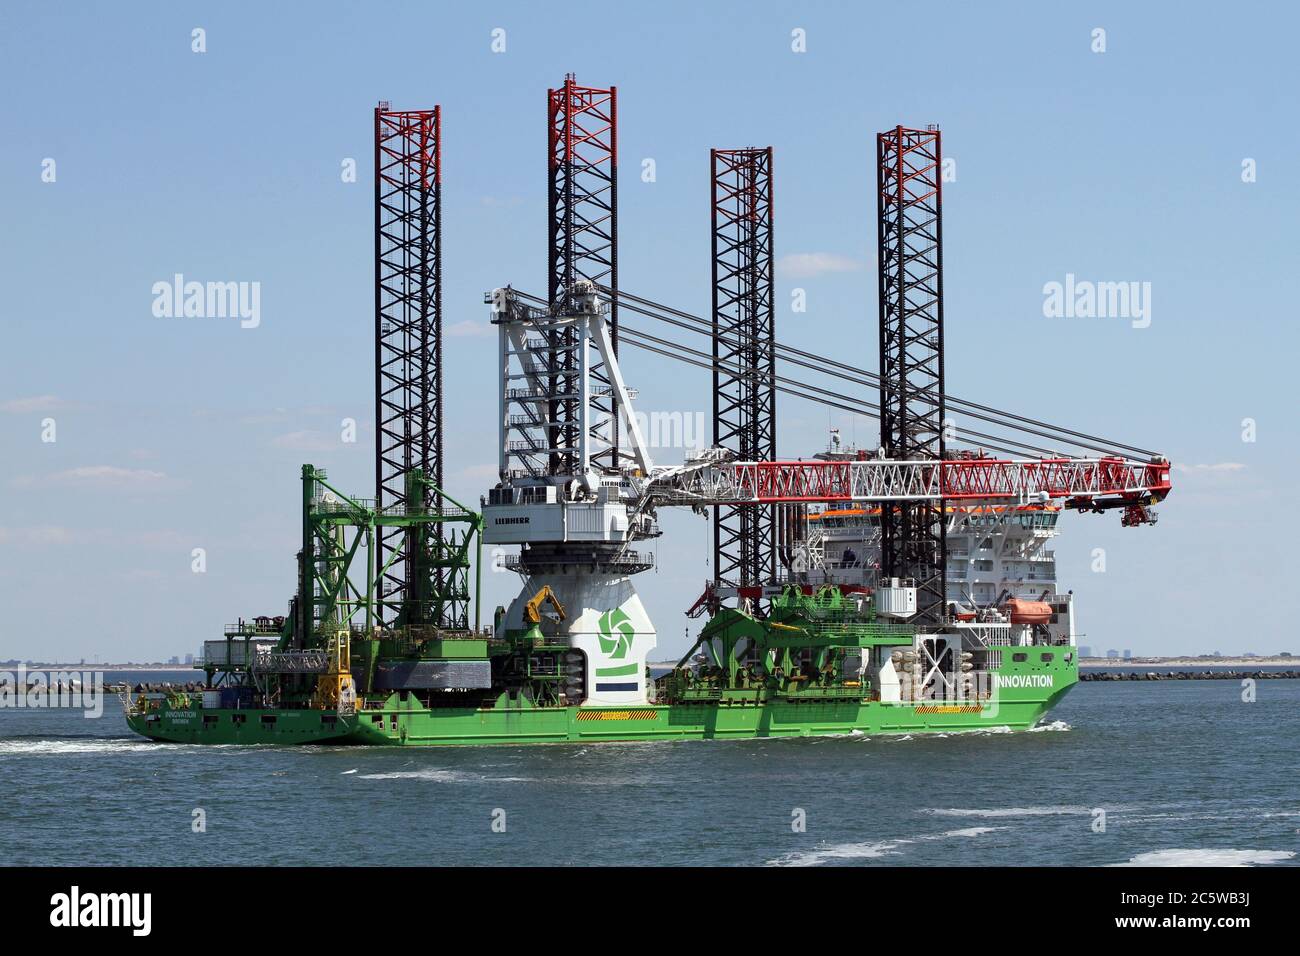 The Offshore Supply Ship Innovation will reach the port of Rotterdam on May 30, 2020. Stock Photo